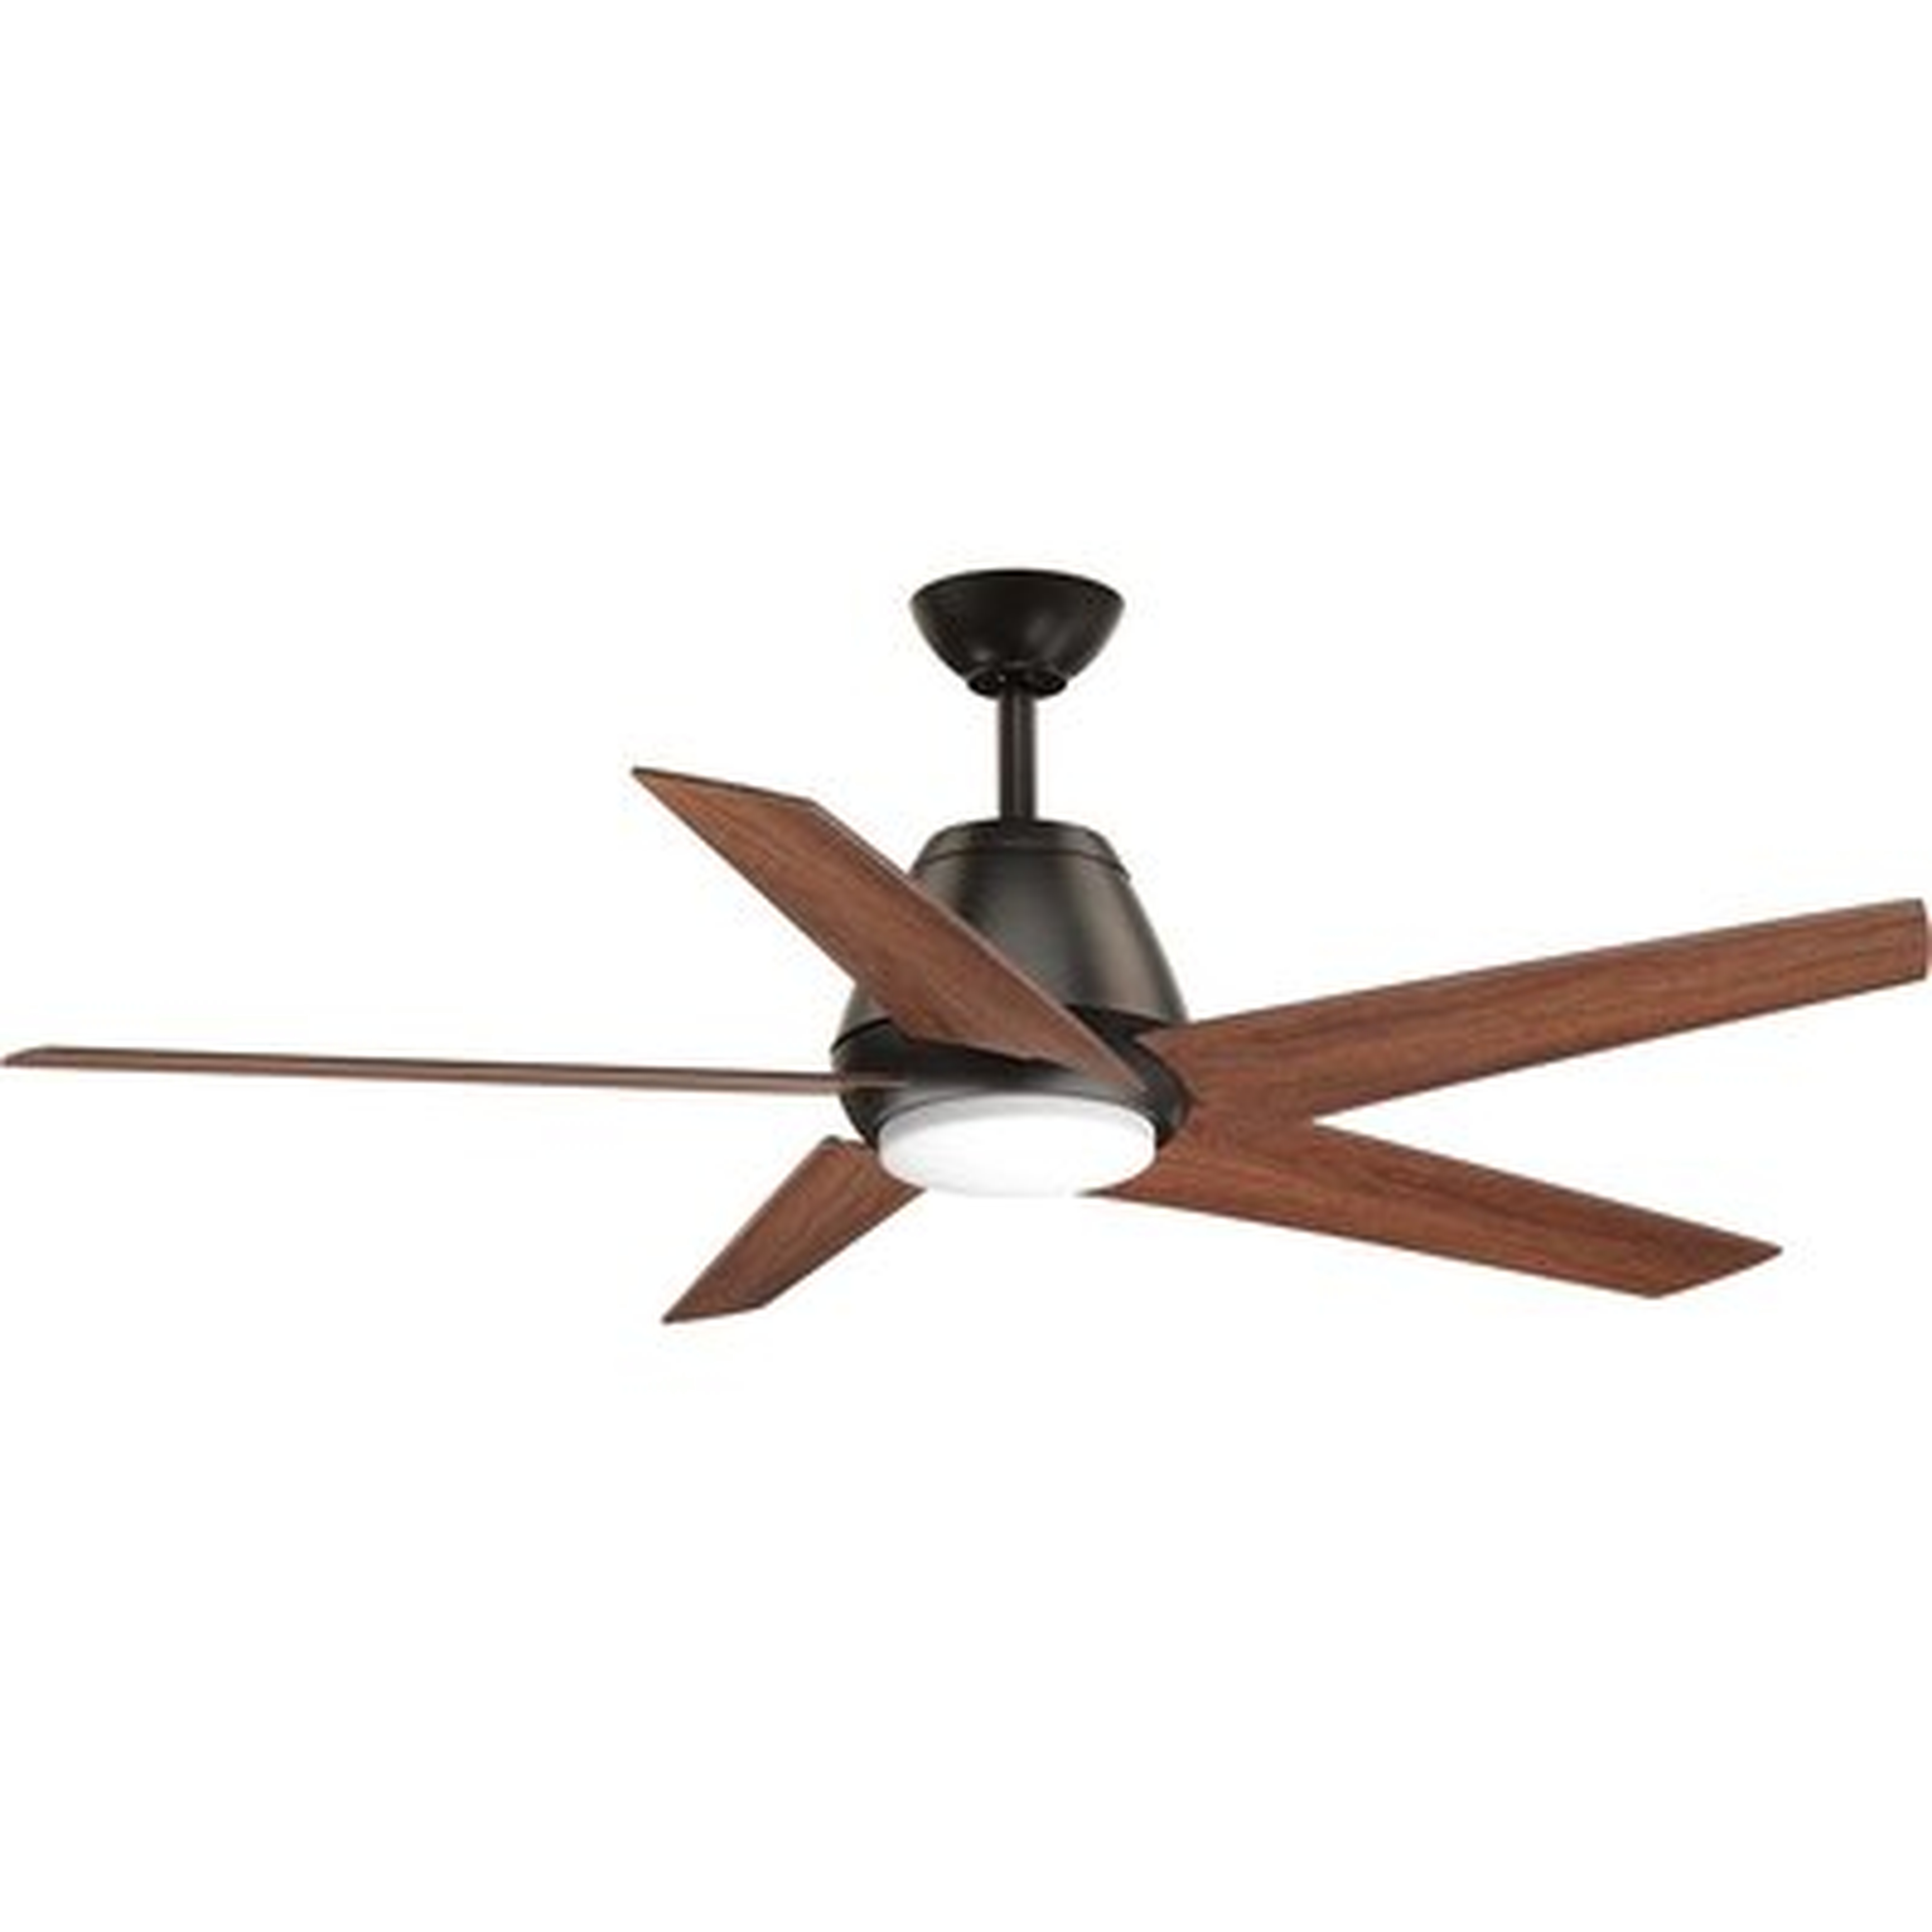 54" Hensley 5 - Blade LED Standard Ceiling Fan with Remote Control and Light Kit Included - AllModern